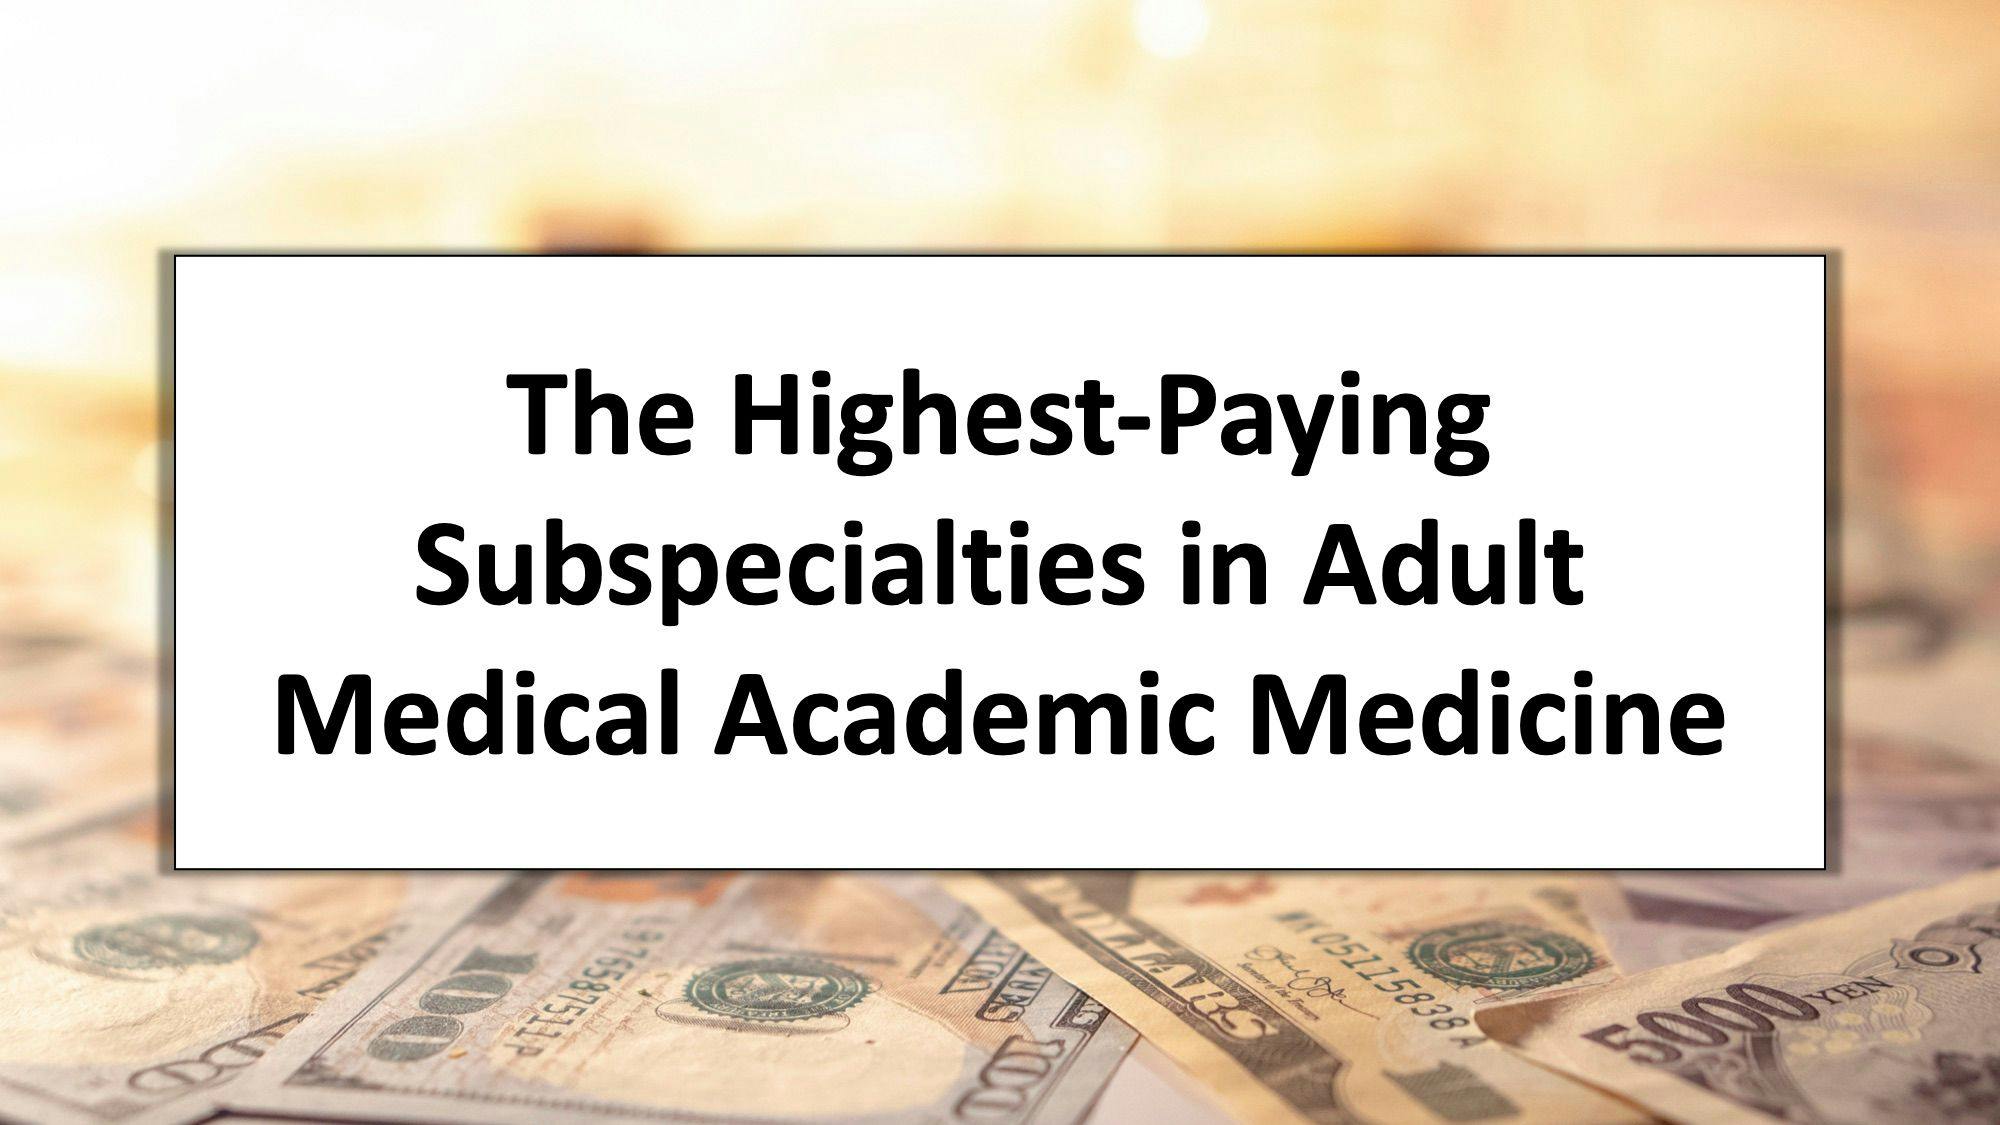 The highest-paying subspecialties in adult medical academic medicine